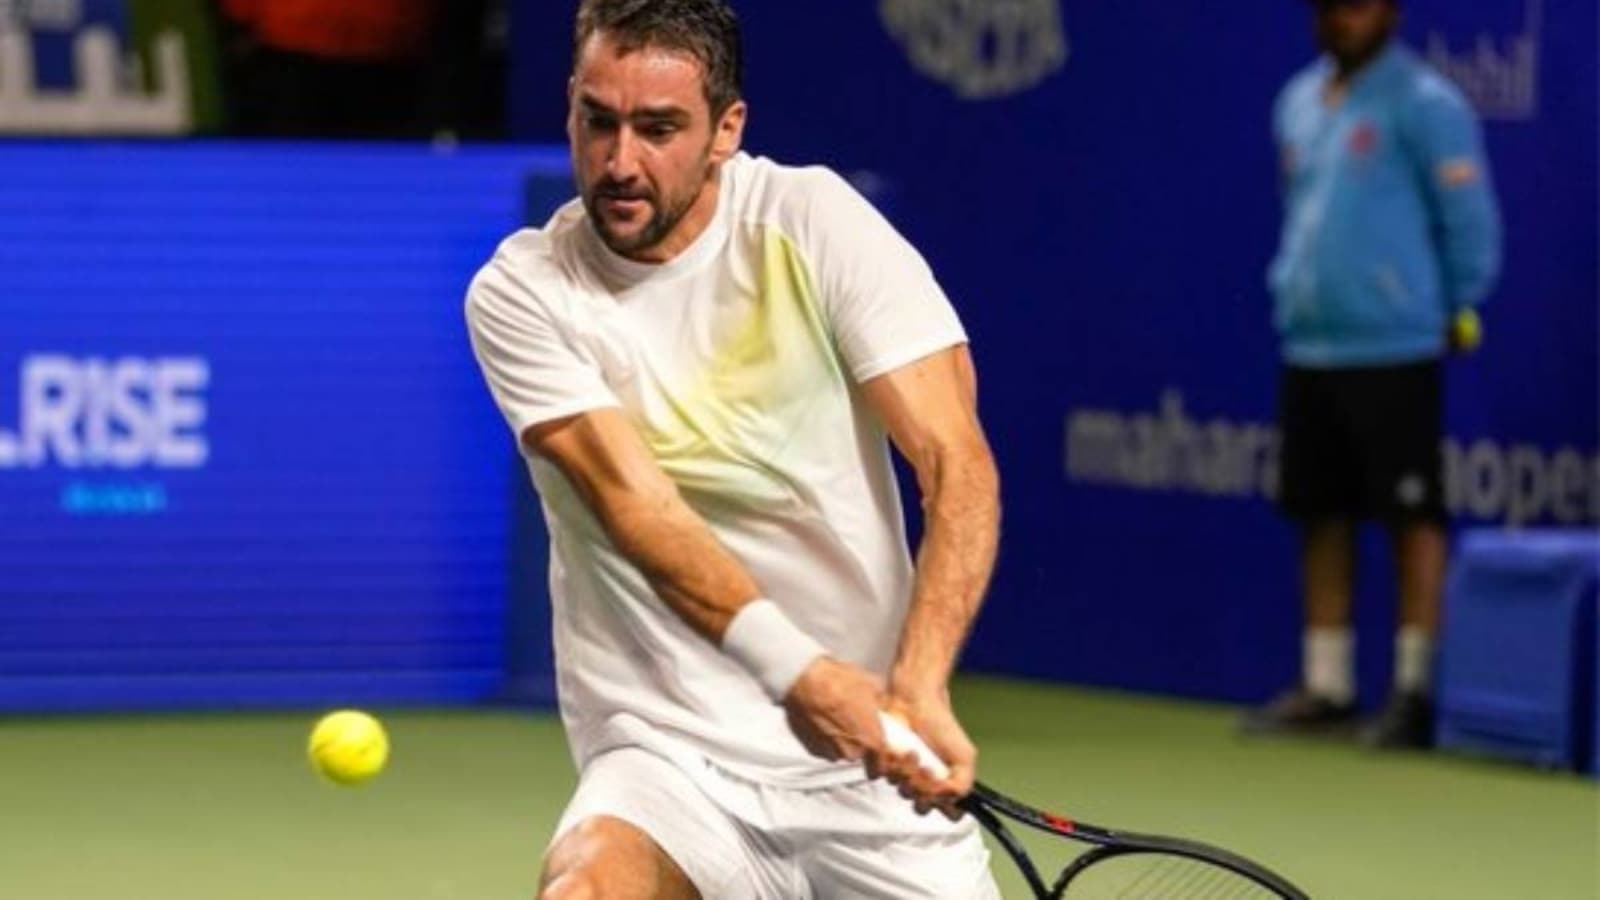 Top seed Marin Cilic pulls out of Tata Open Maharashtra due to knee injury